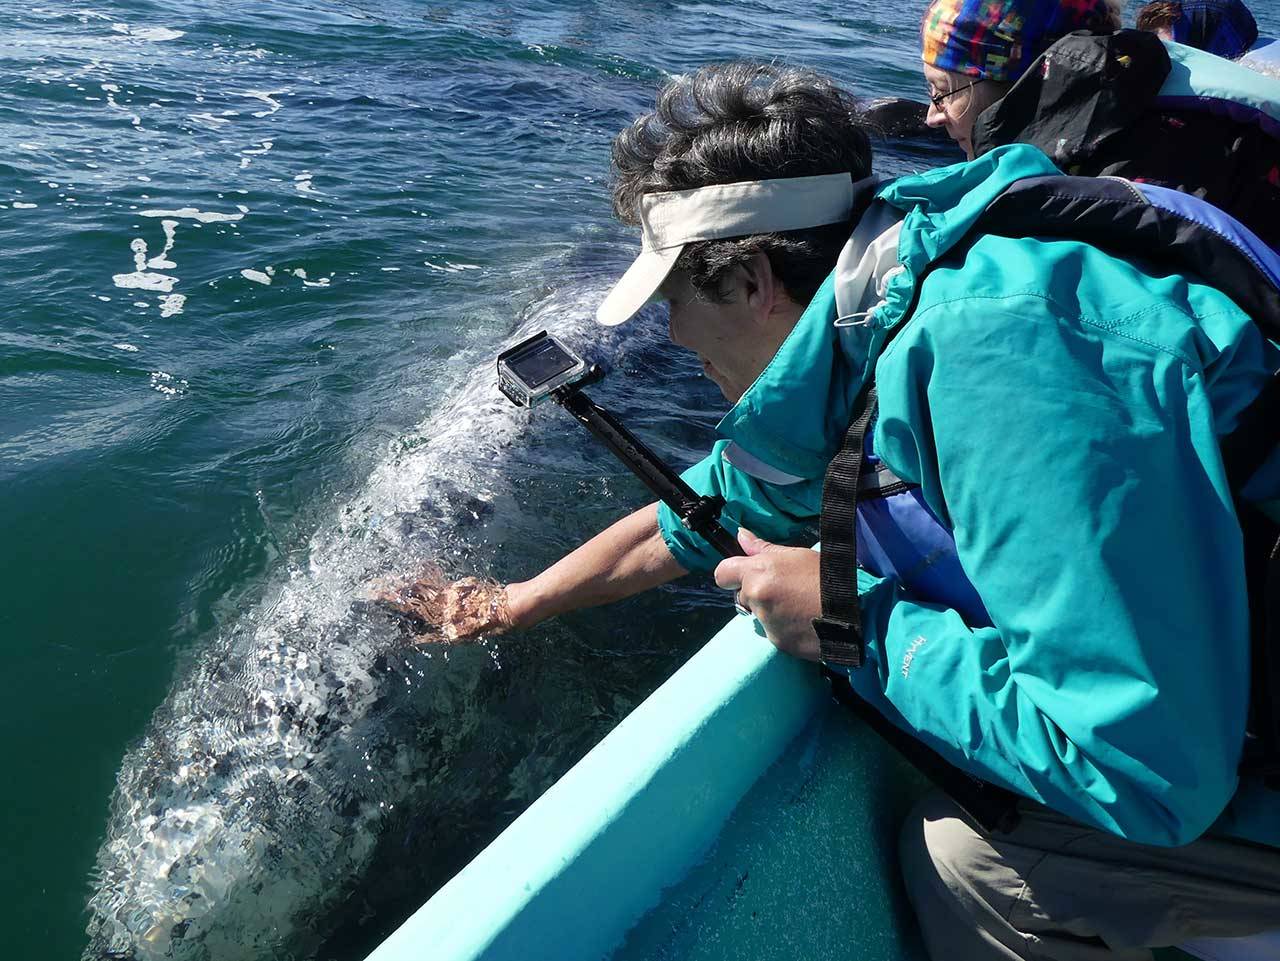 Lee Fritsch reaches out to touch a gray whale in San Ignacio Lagoon in Baja, Mexico. Called “Friendlies,” the curious whales are among a larger group that migrate to the southern waters from Alaska to birth in calm Pacific coast waters. (Photo by Susan Berta, Orca Network)